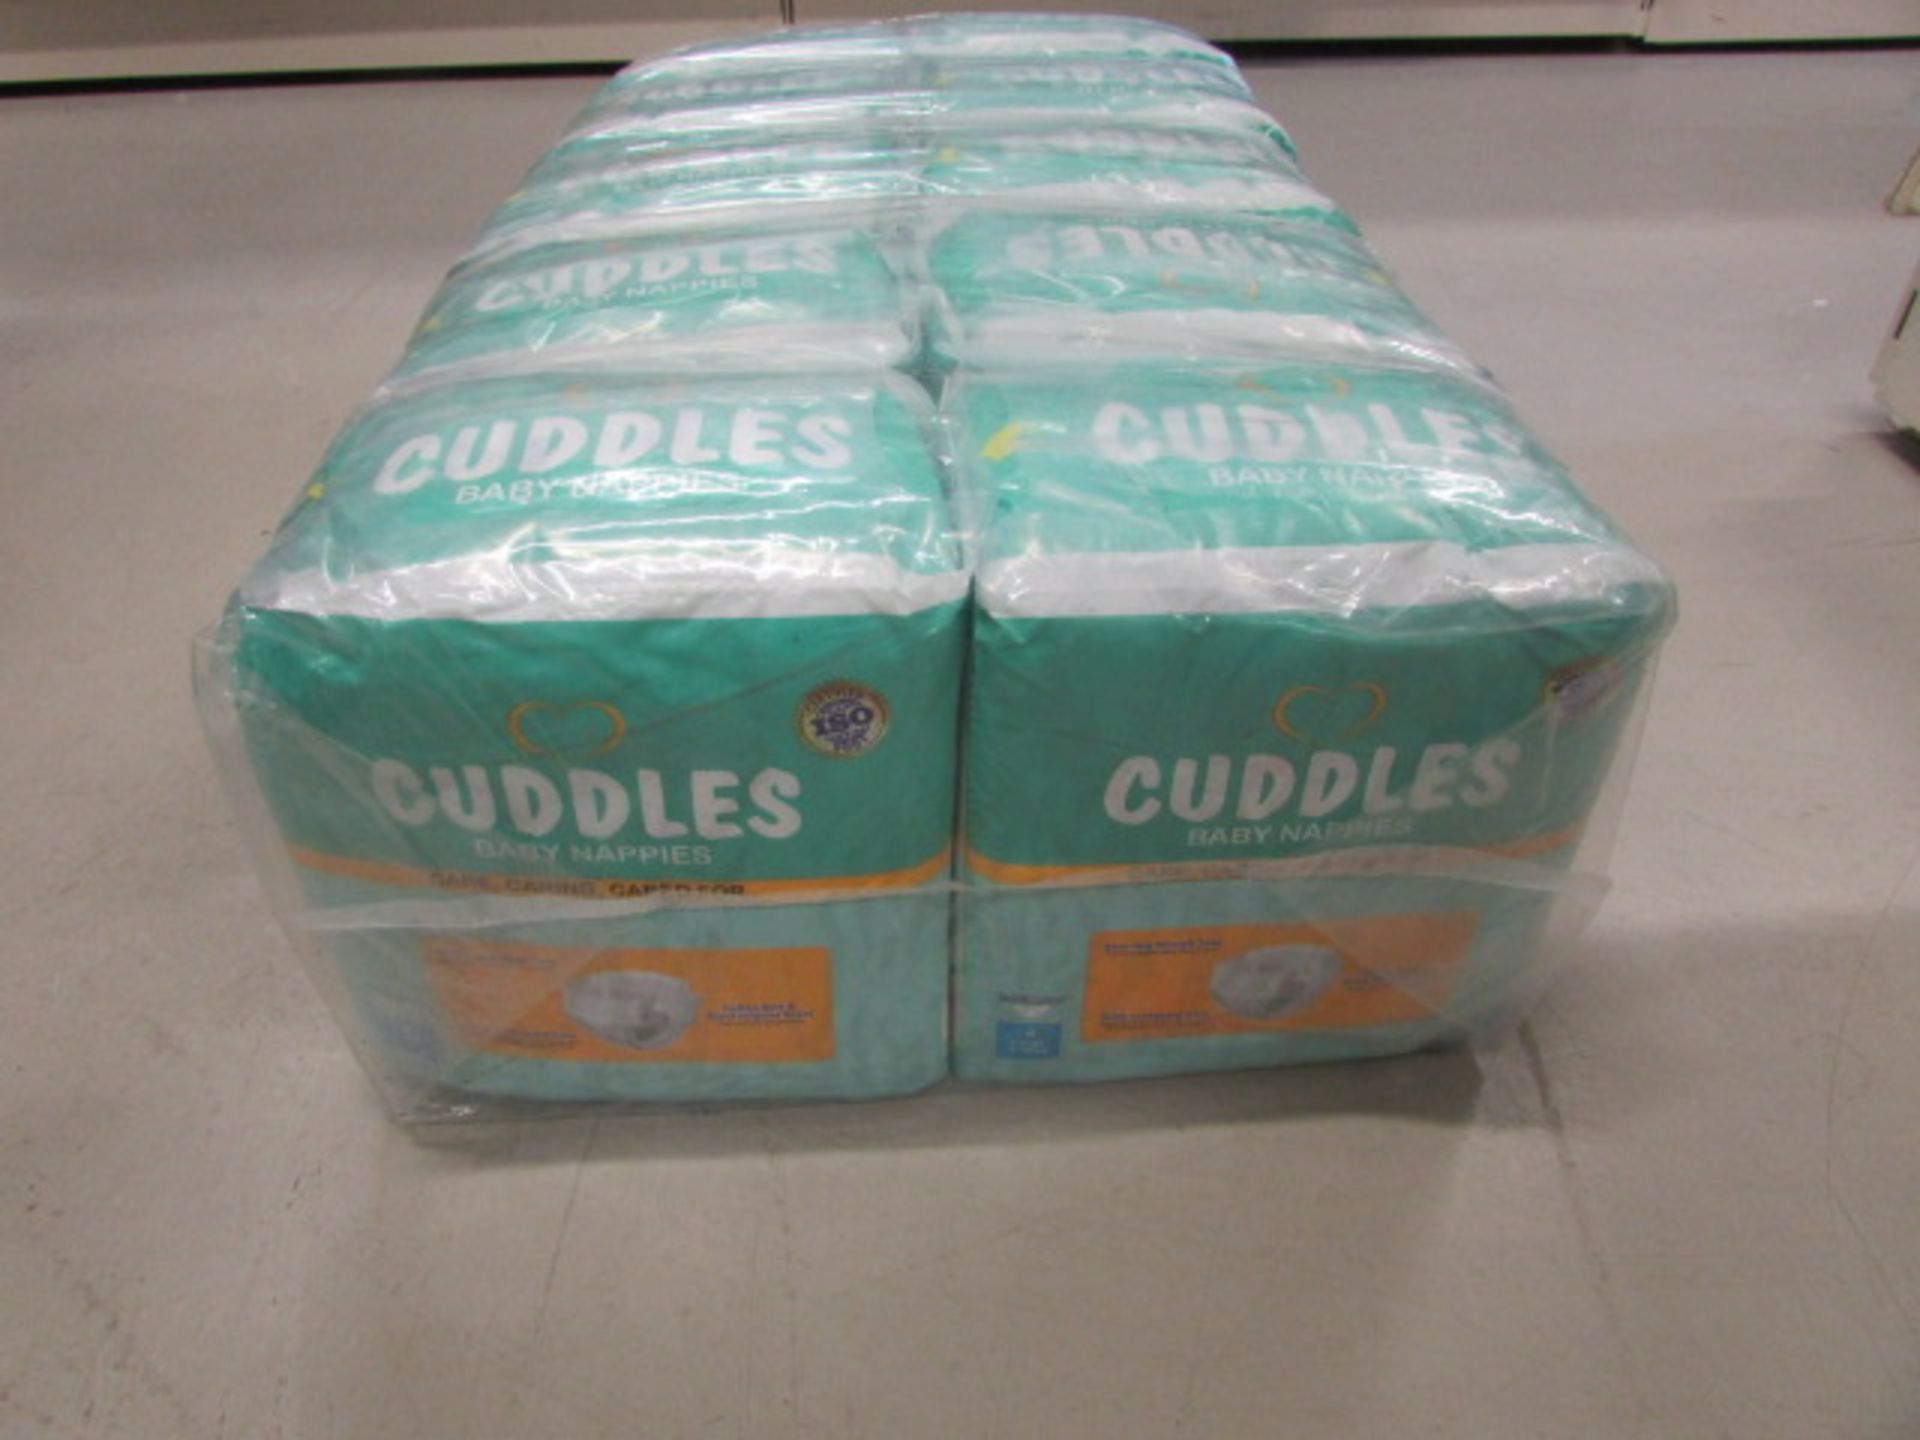 1 x Outer Carton, 10 Packs In An Outer, 18 Nappies in A Pack (180 Nappies In Total) [Size 3]